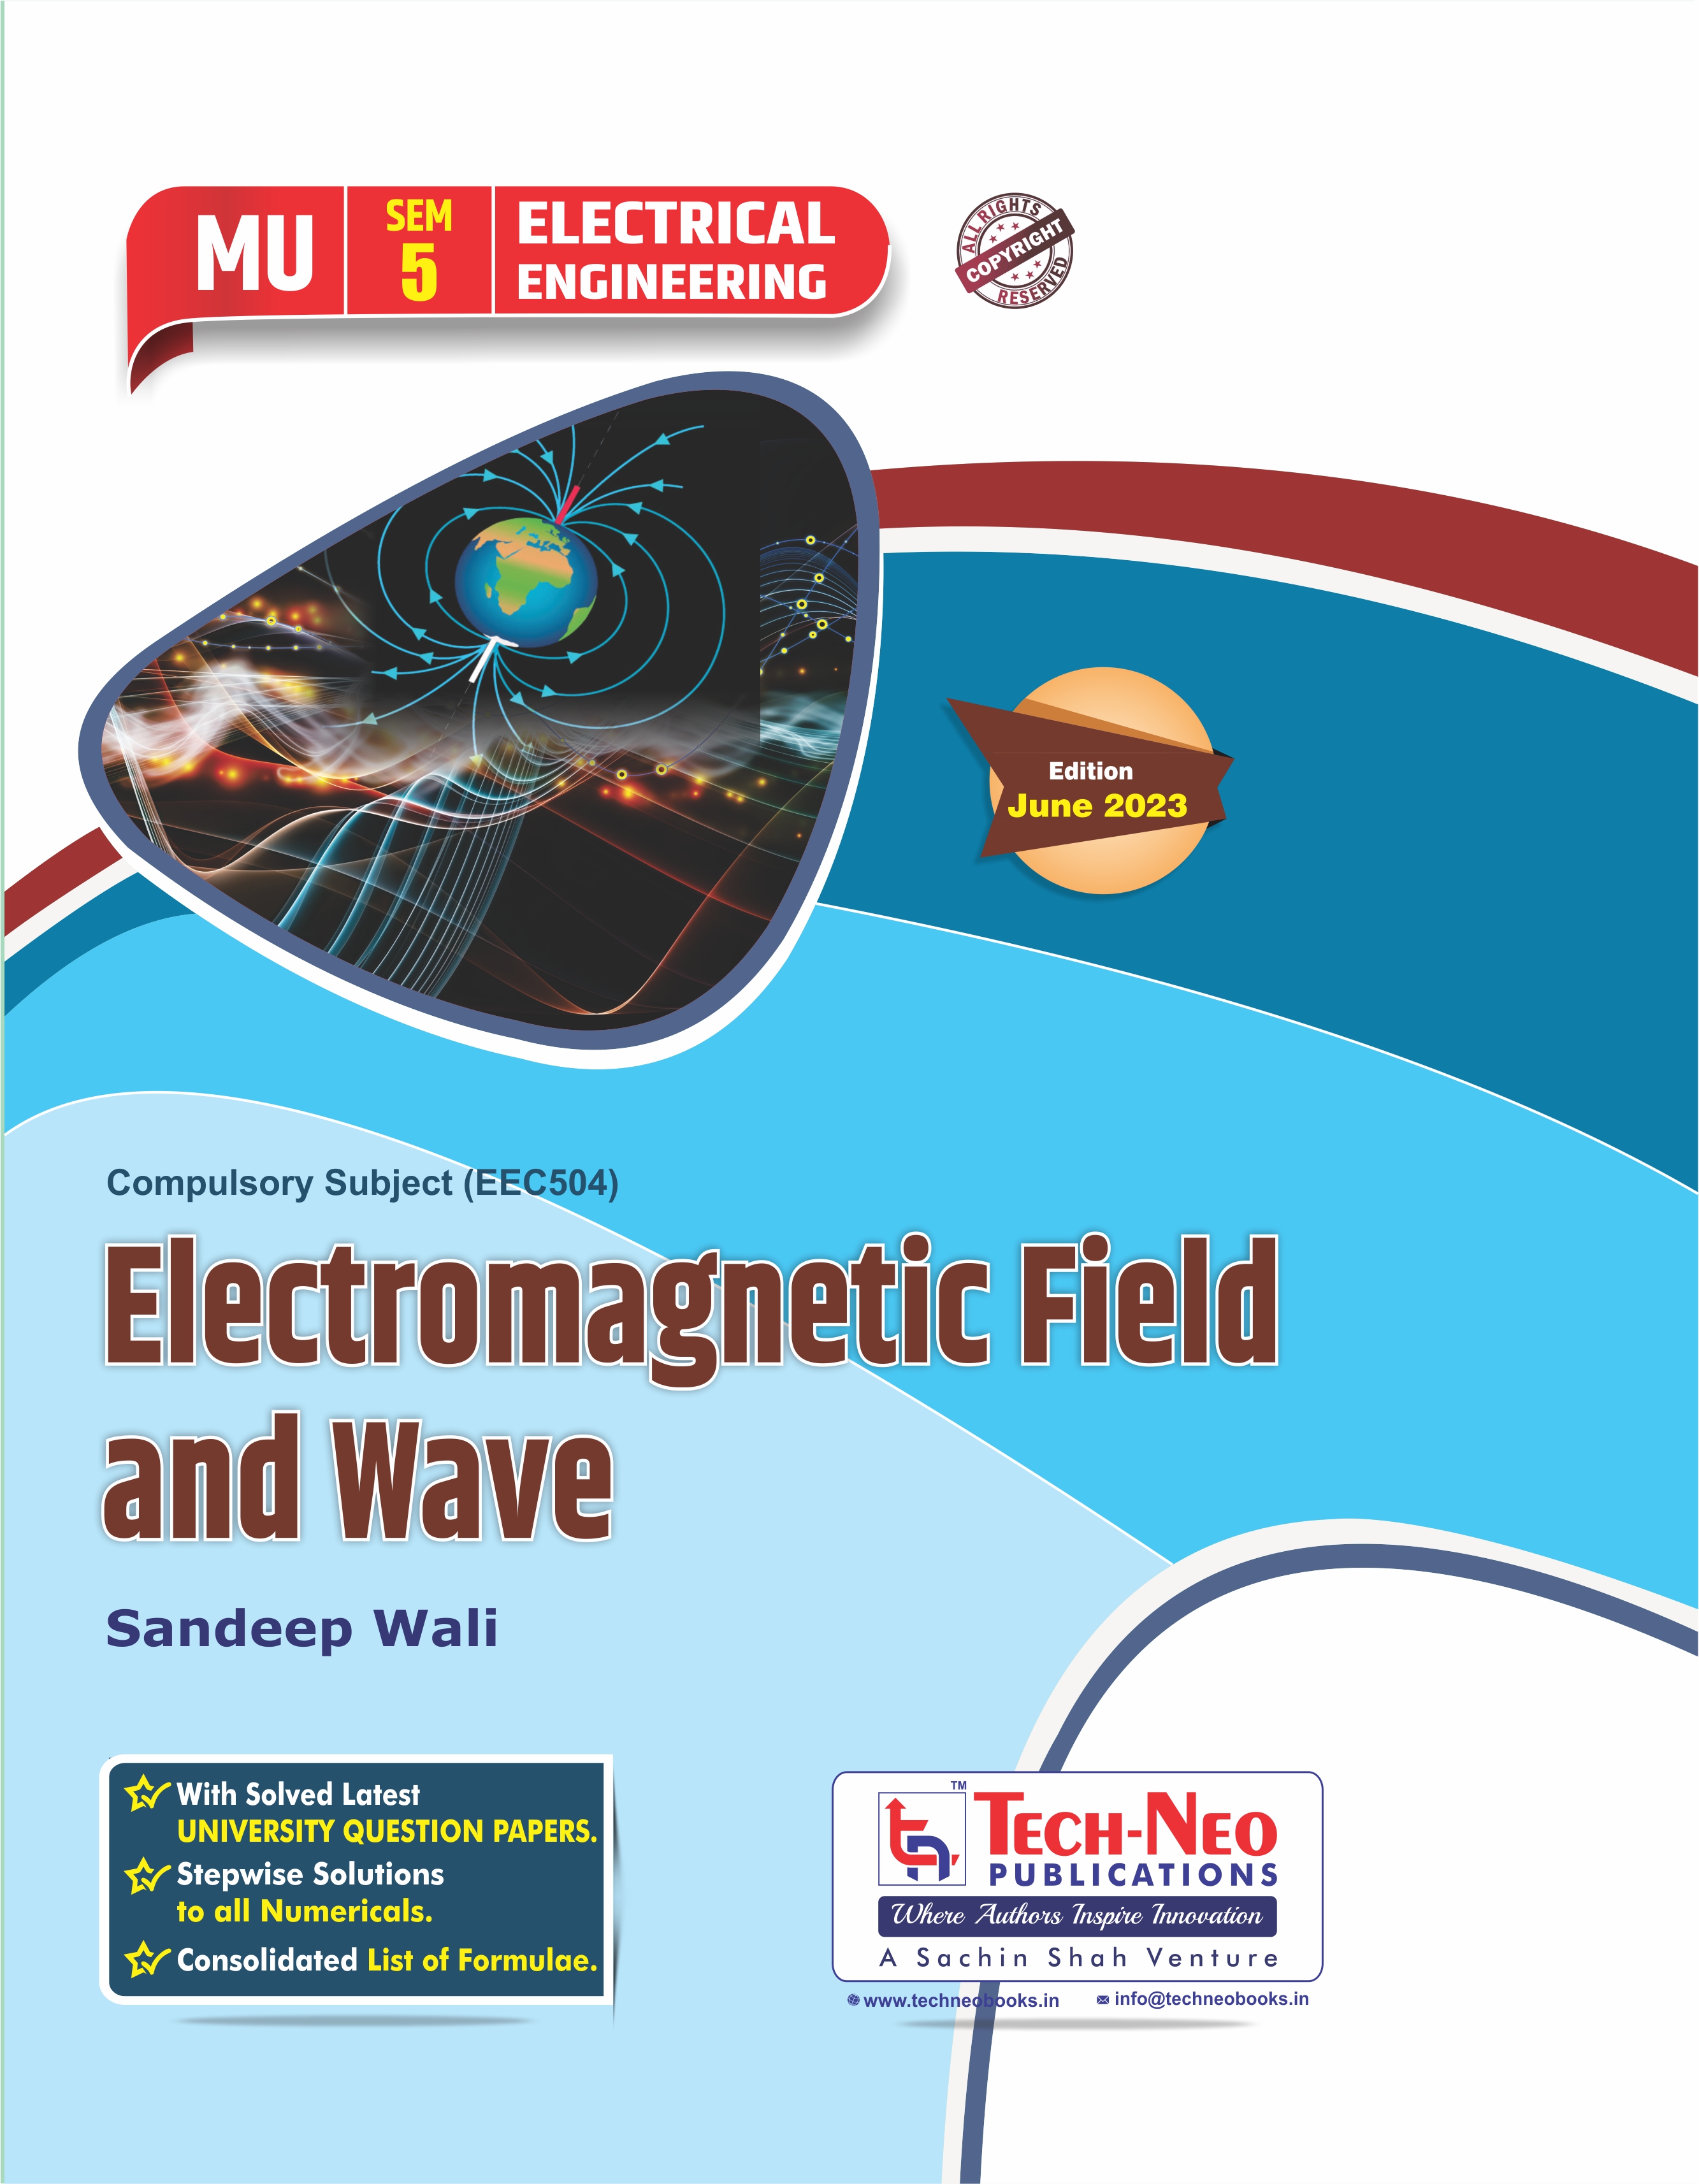 Eletcromagnetic Field and Field and Waves